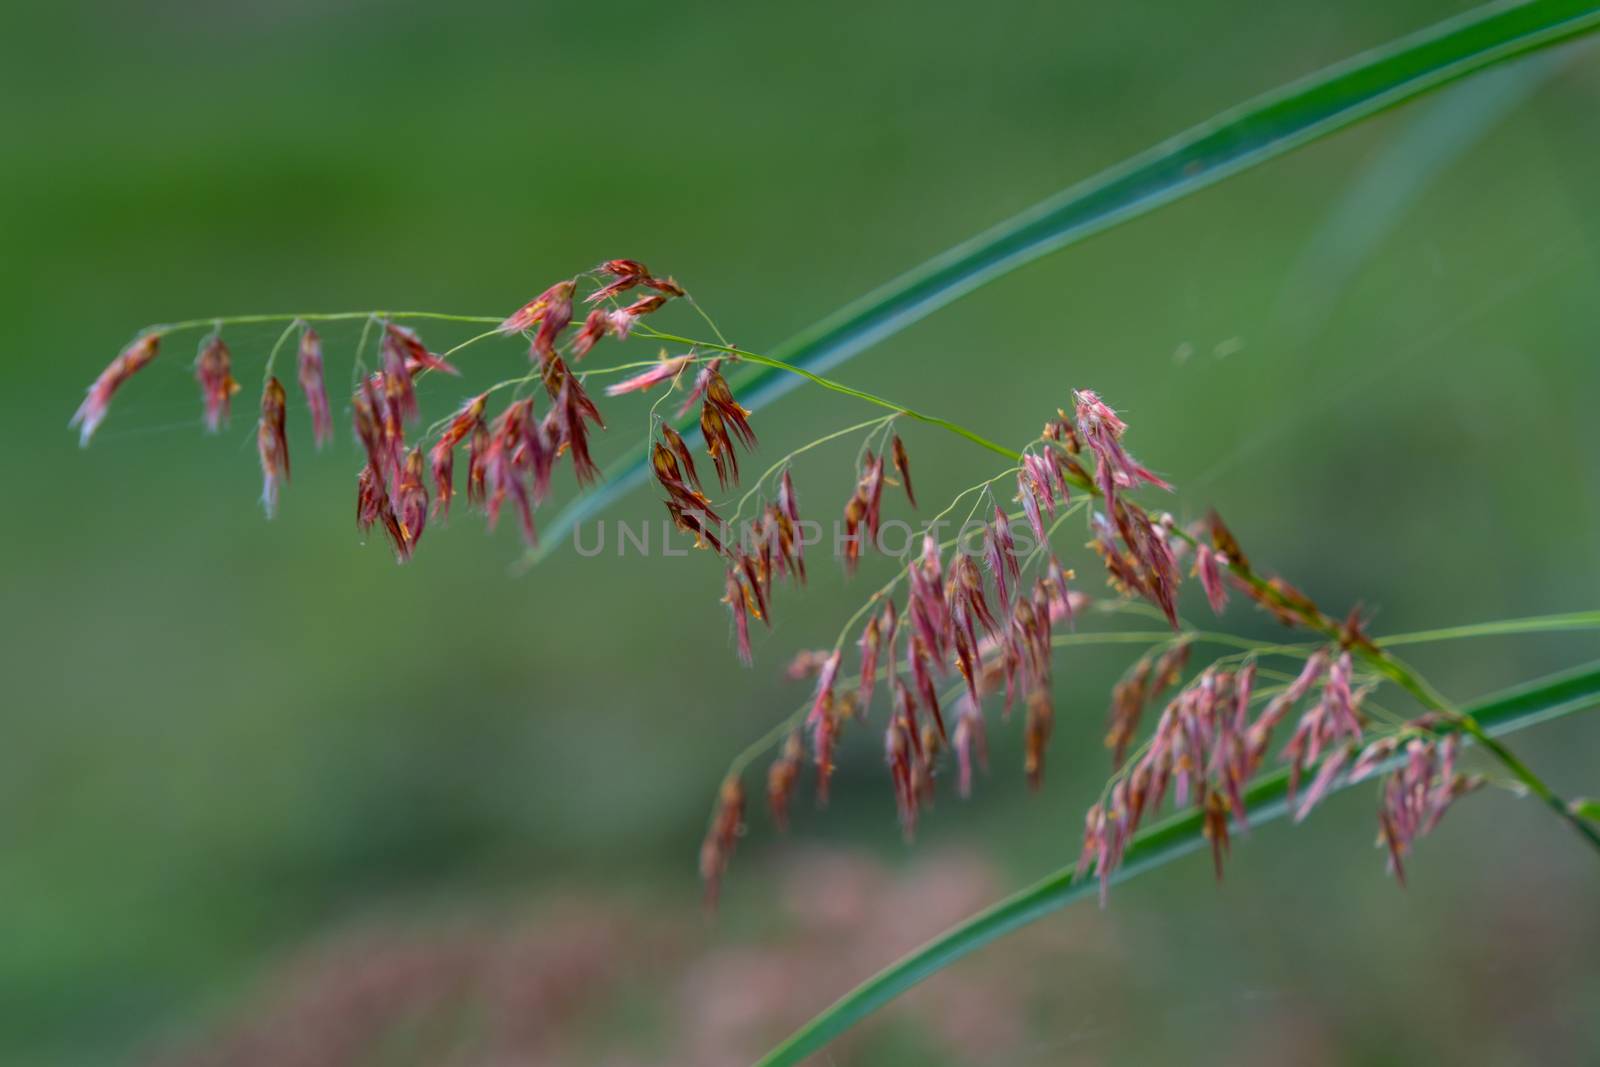 The select focus of grass flower with blur background